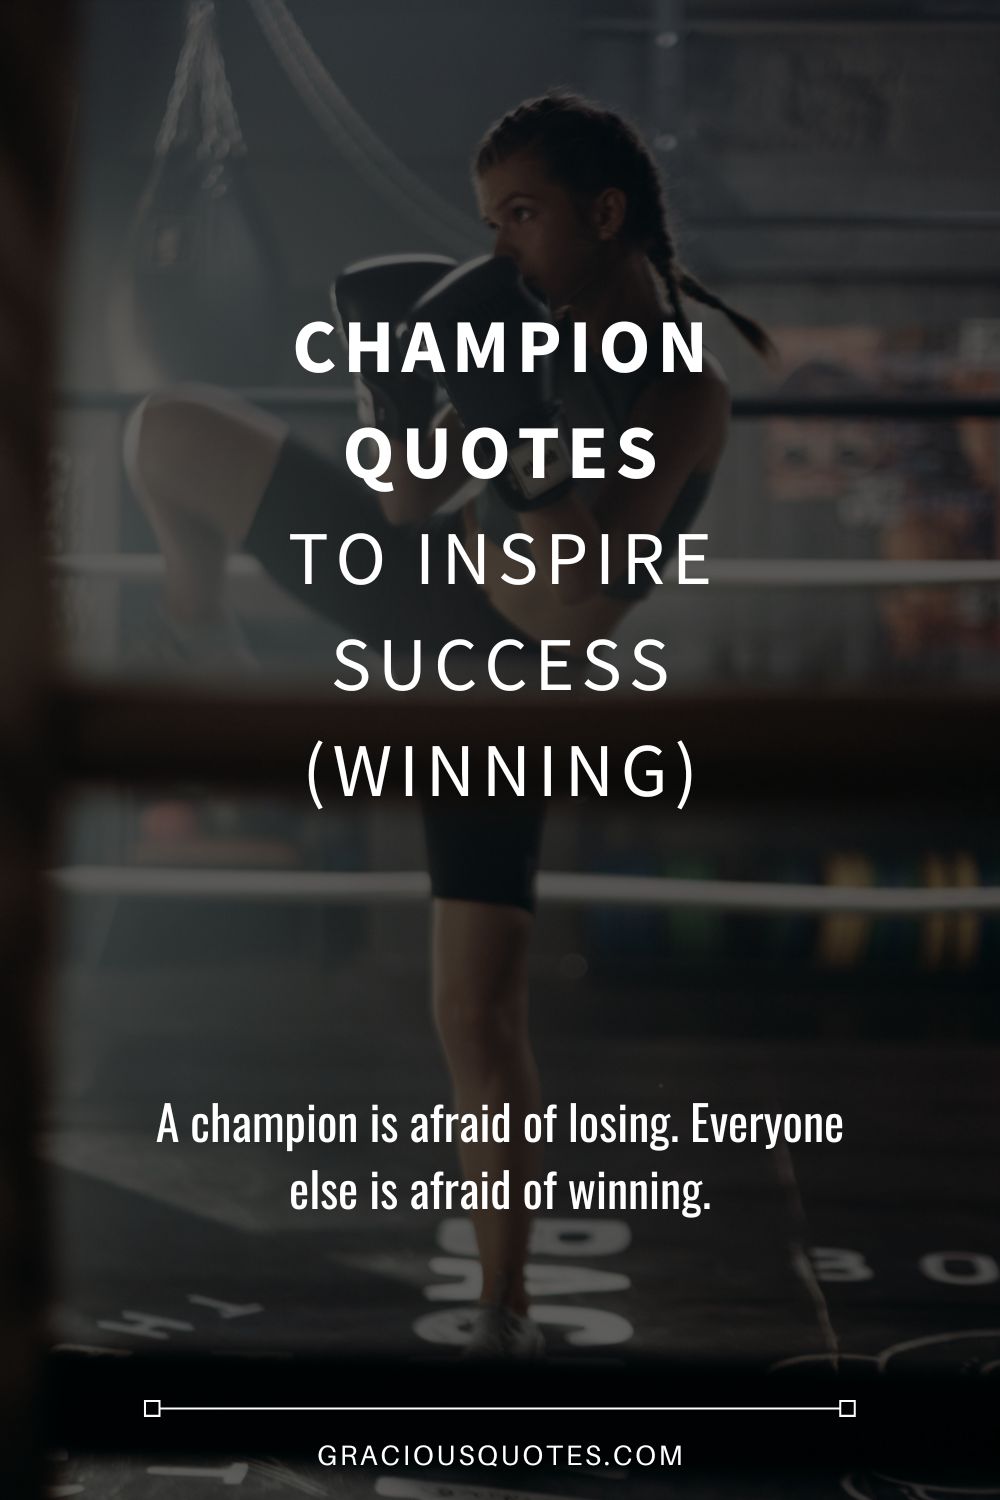 4 champion quotes to get you inspired